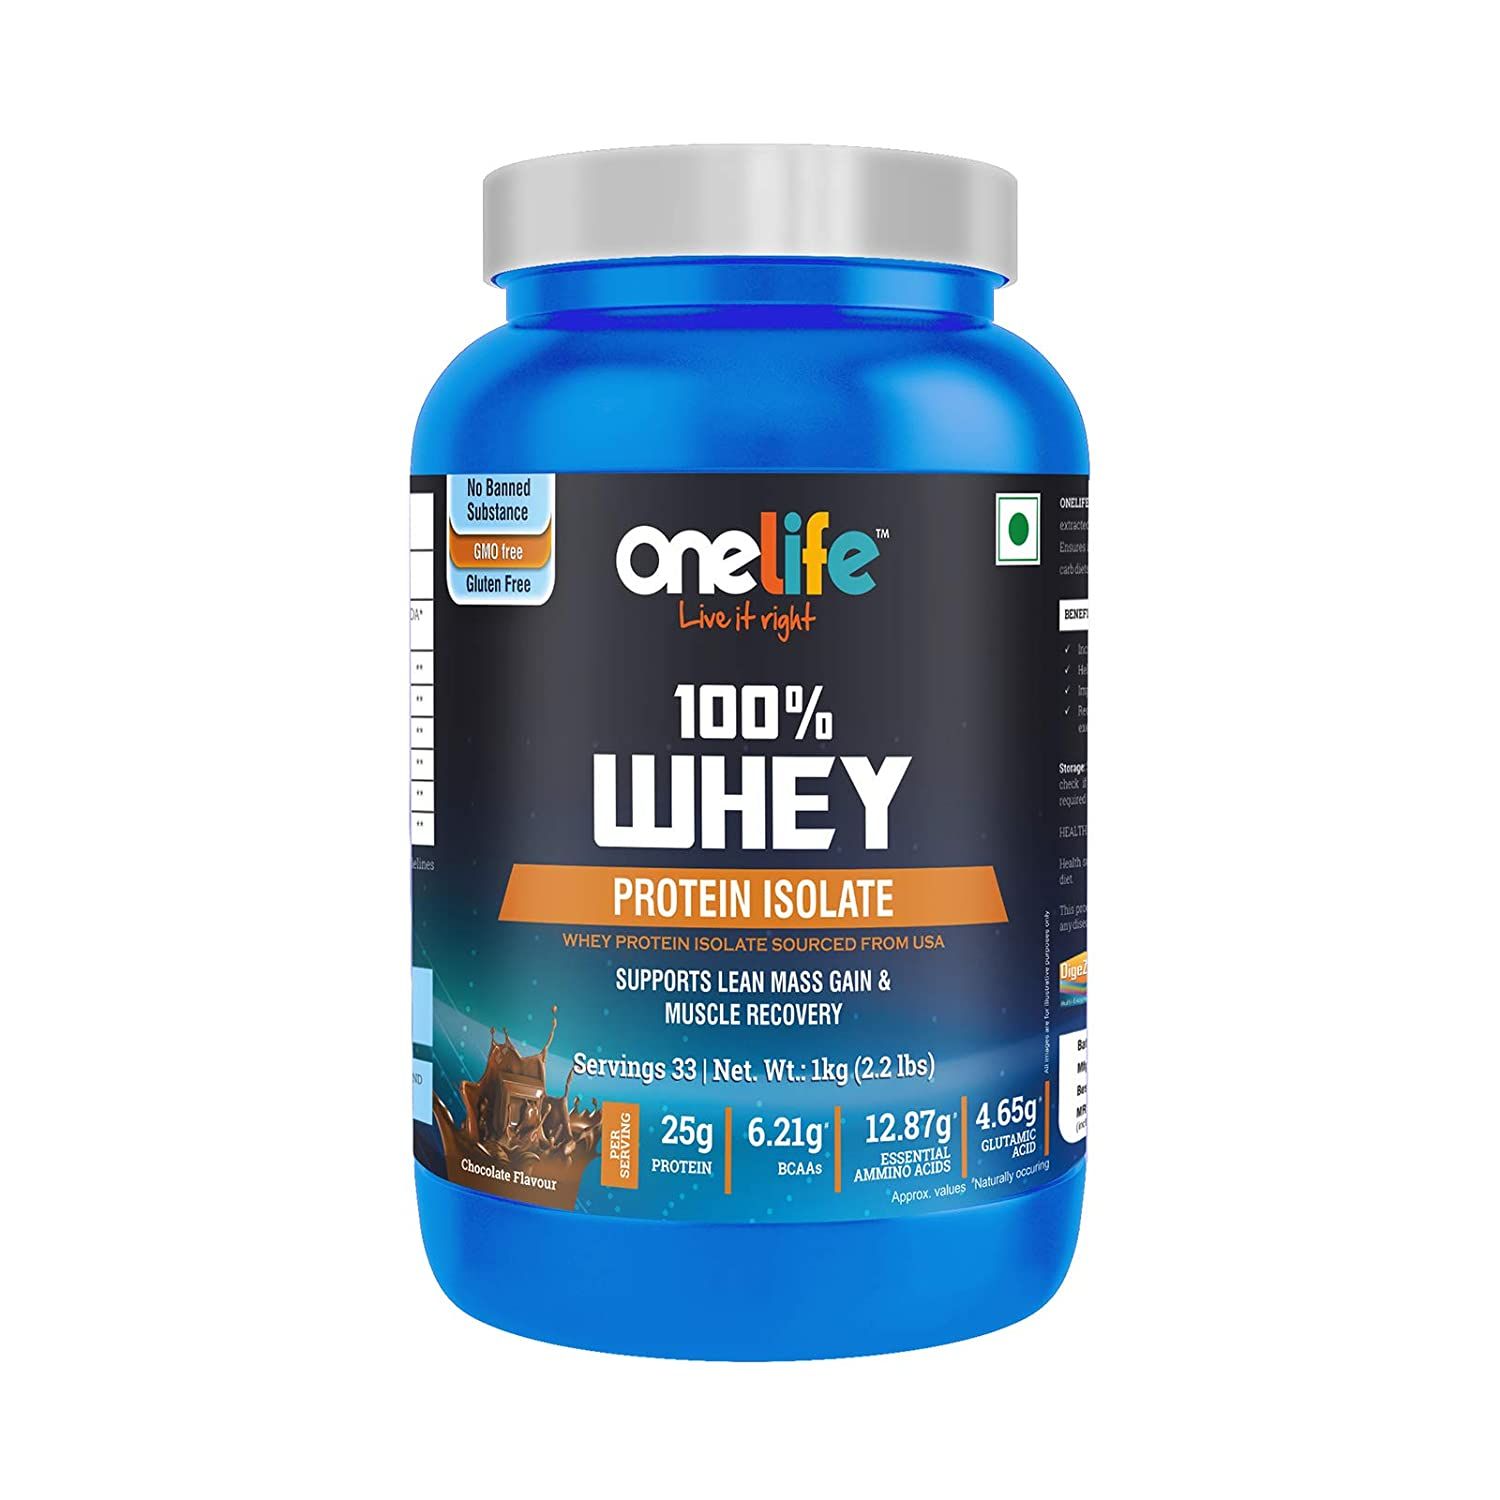 Onelife Whey Protein Isolate Image